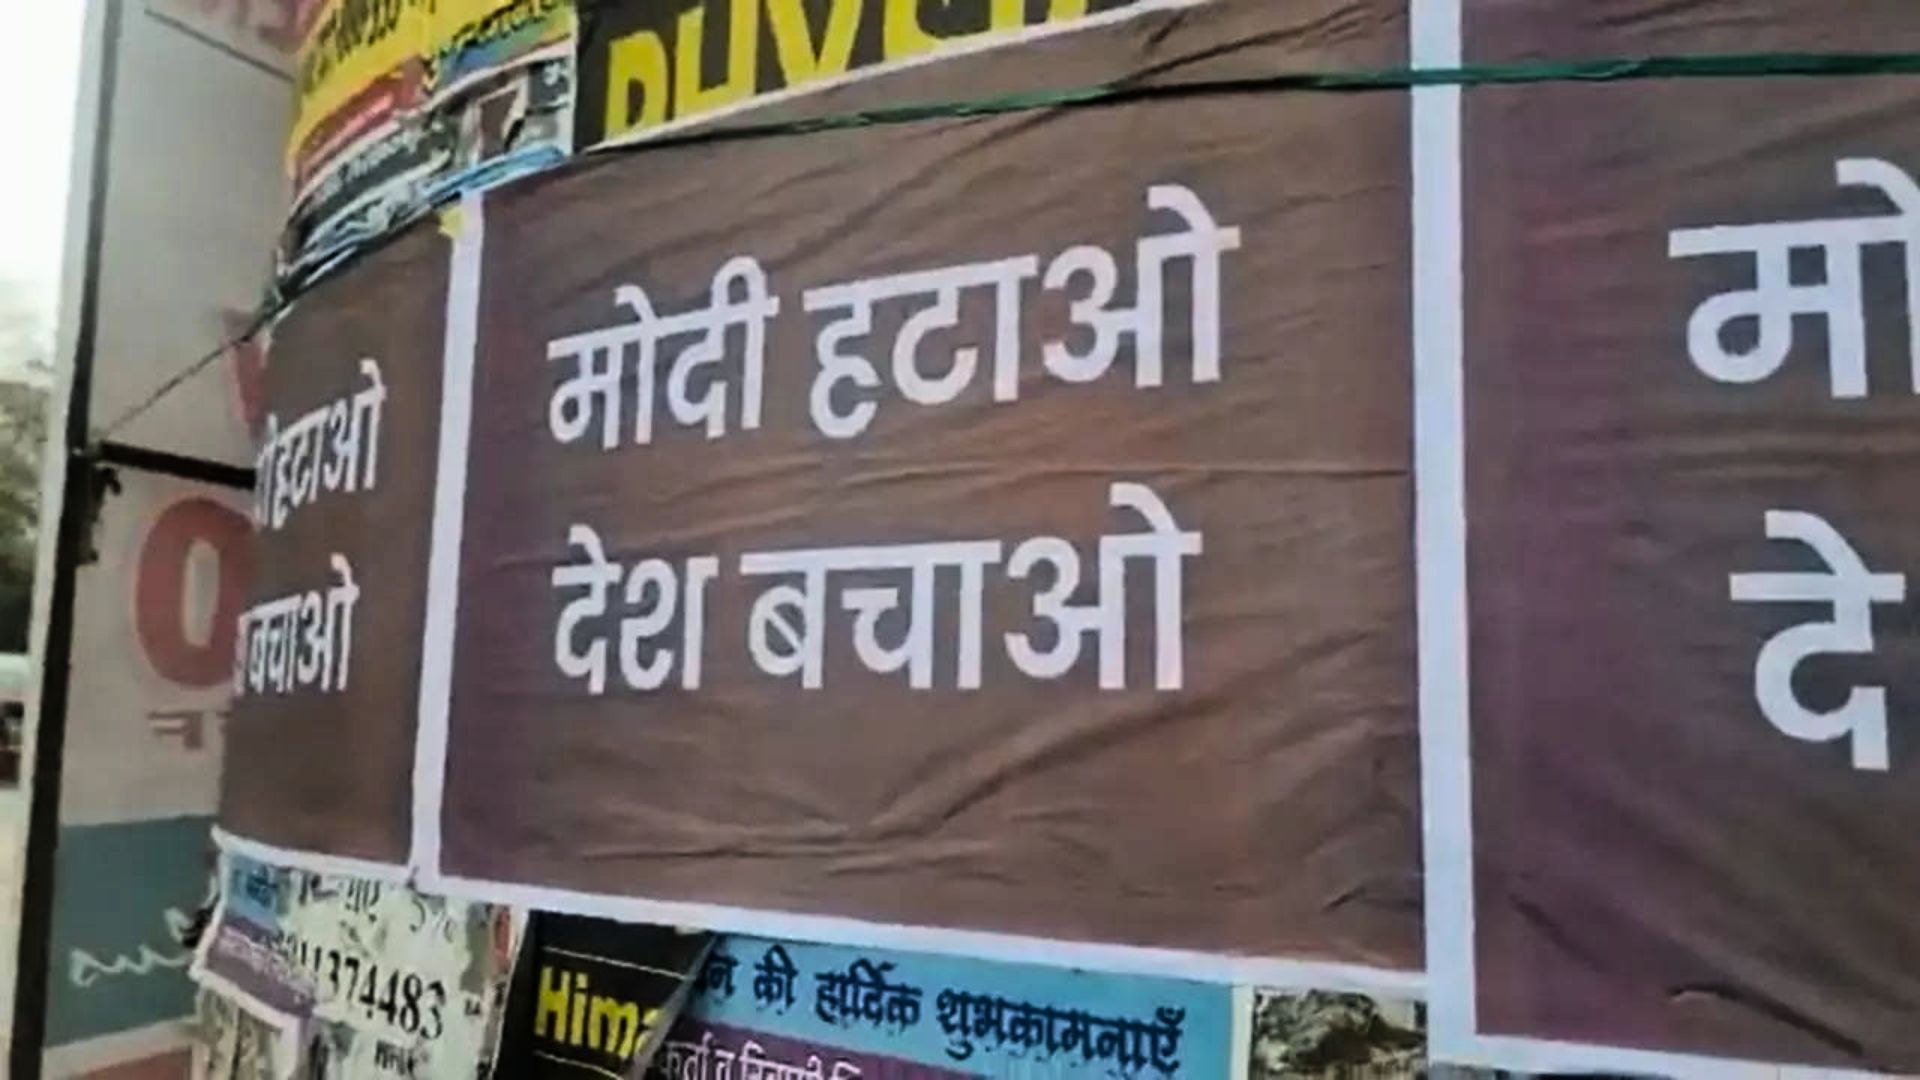 Delhi police file FIR over ‘objectionable’ posters against PM